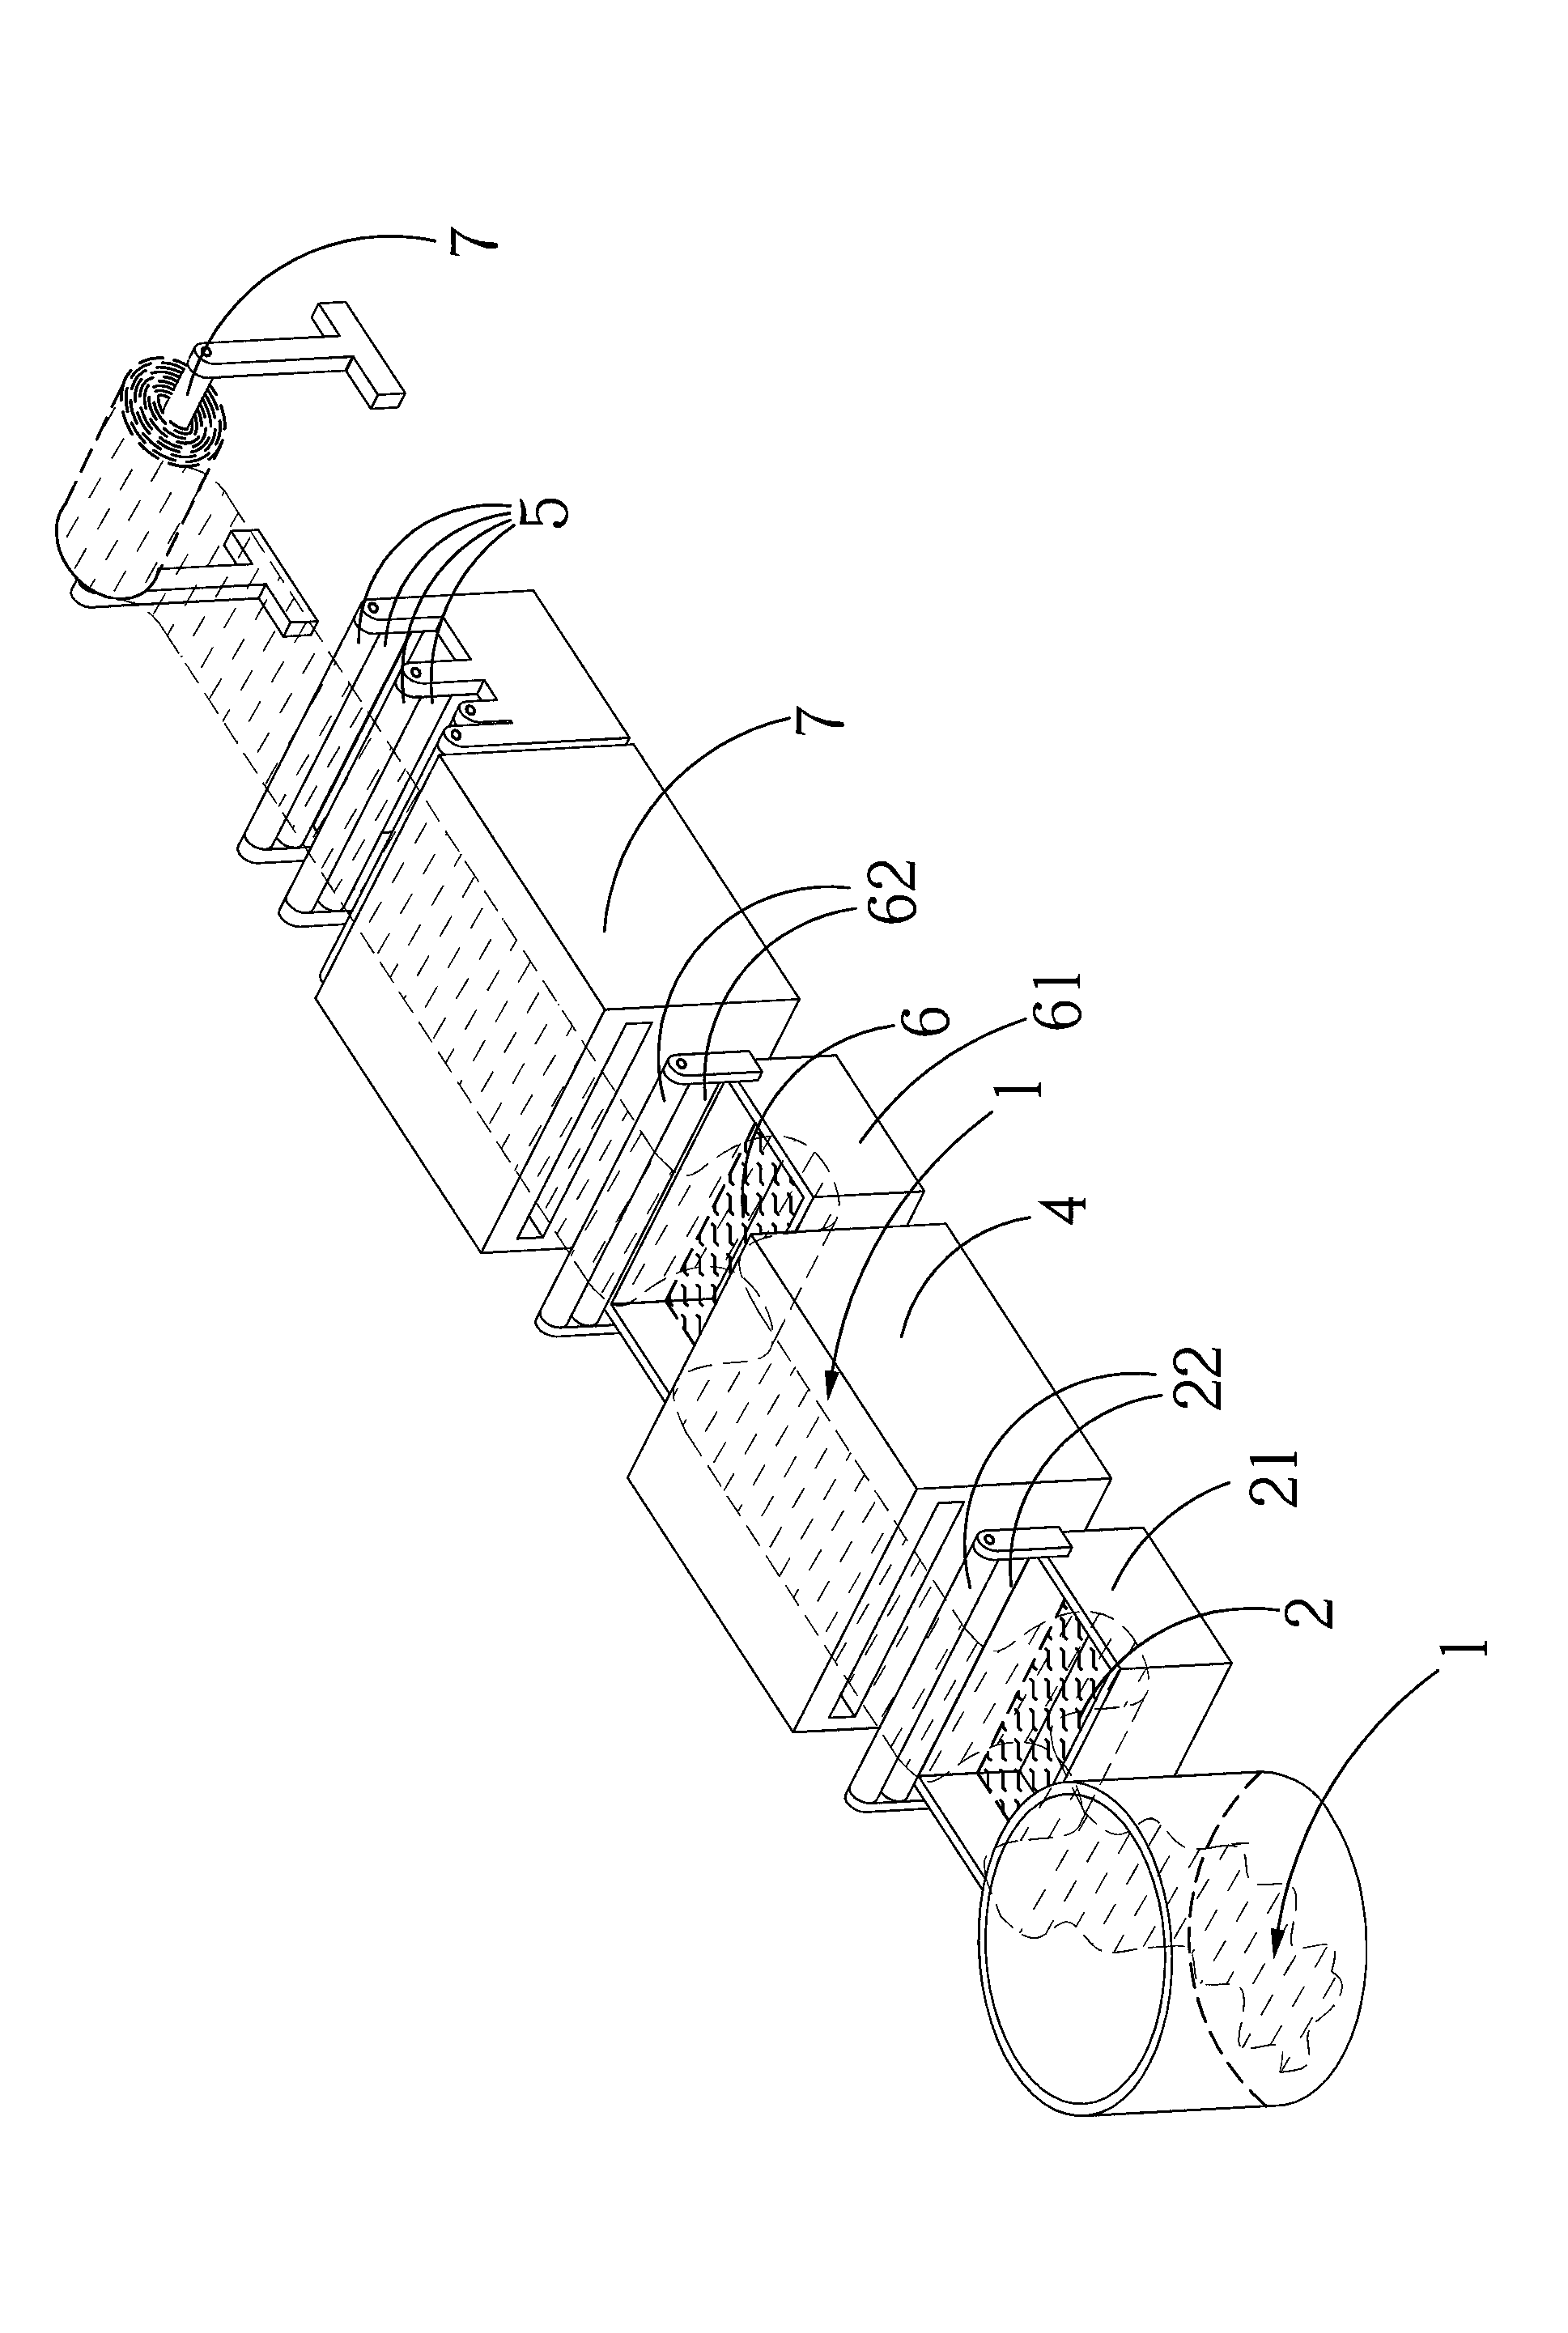 Blade of window-shades and manufacturing method of blade